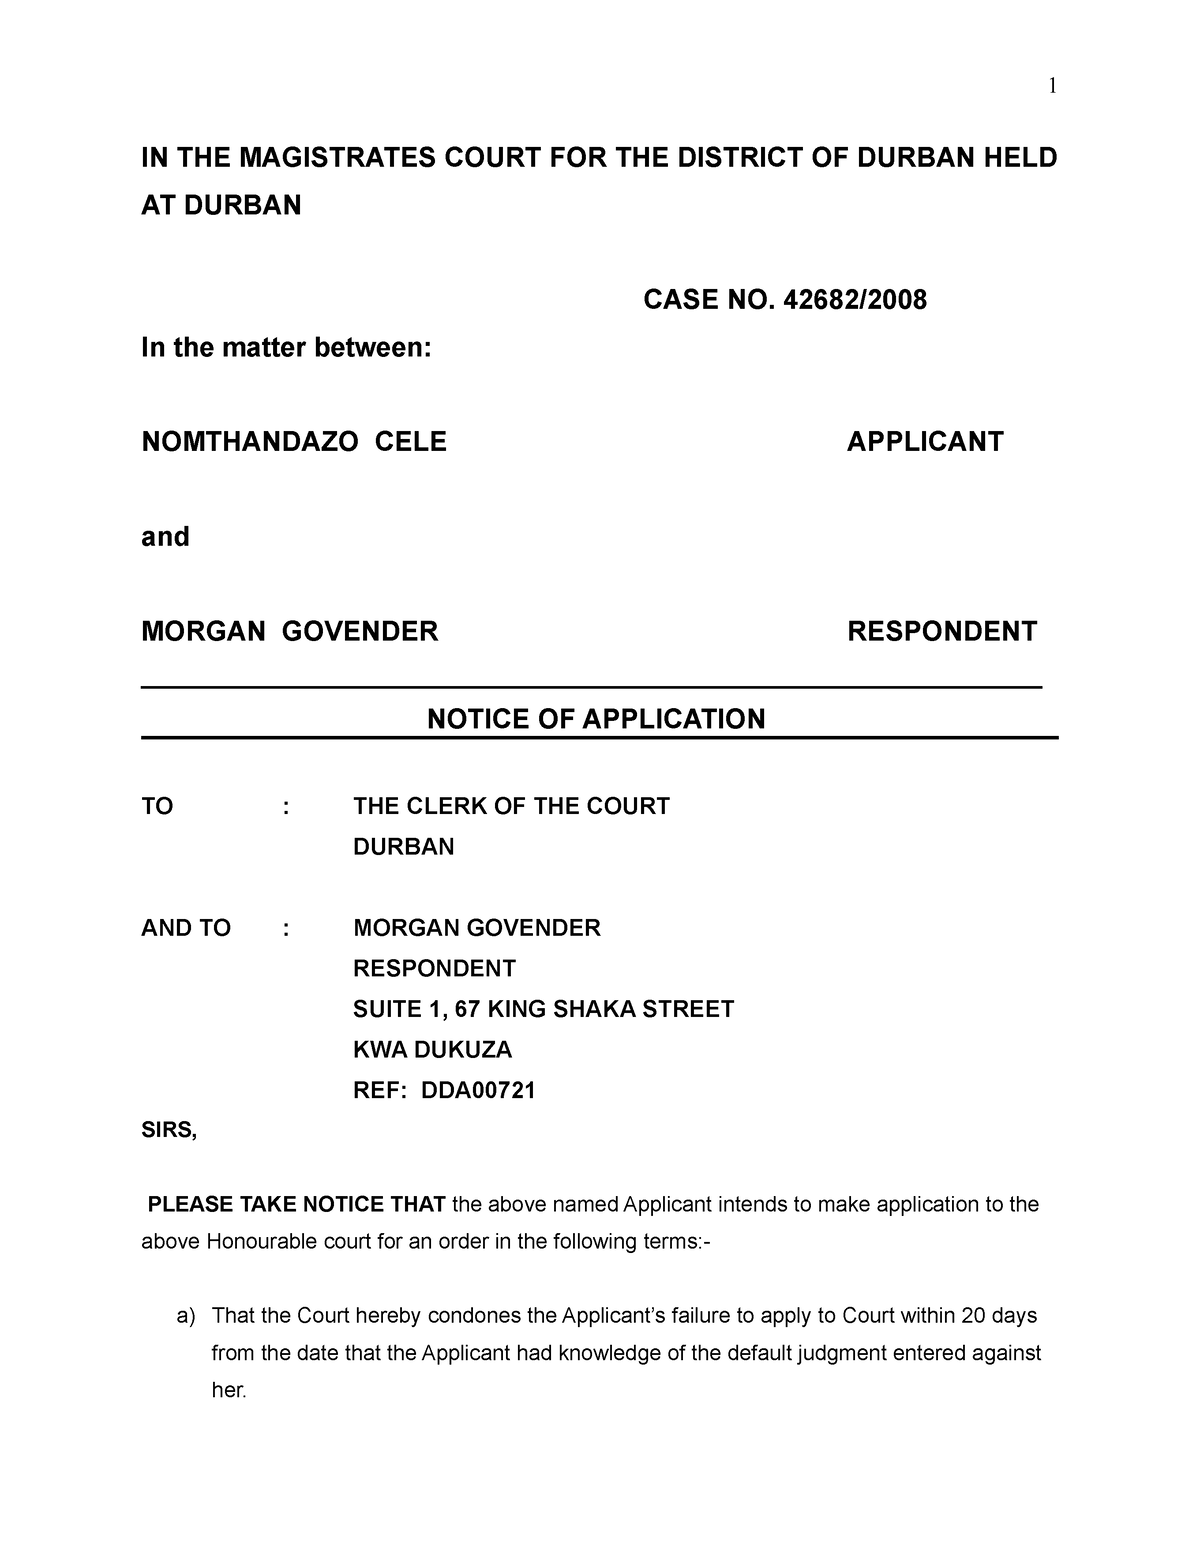 Application For Rescission Of Judgement In The Magistrates Court For The District Of Durban